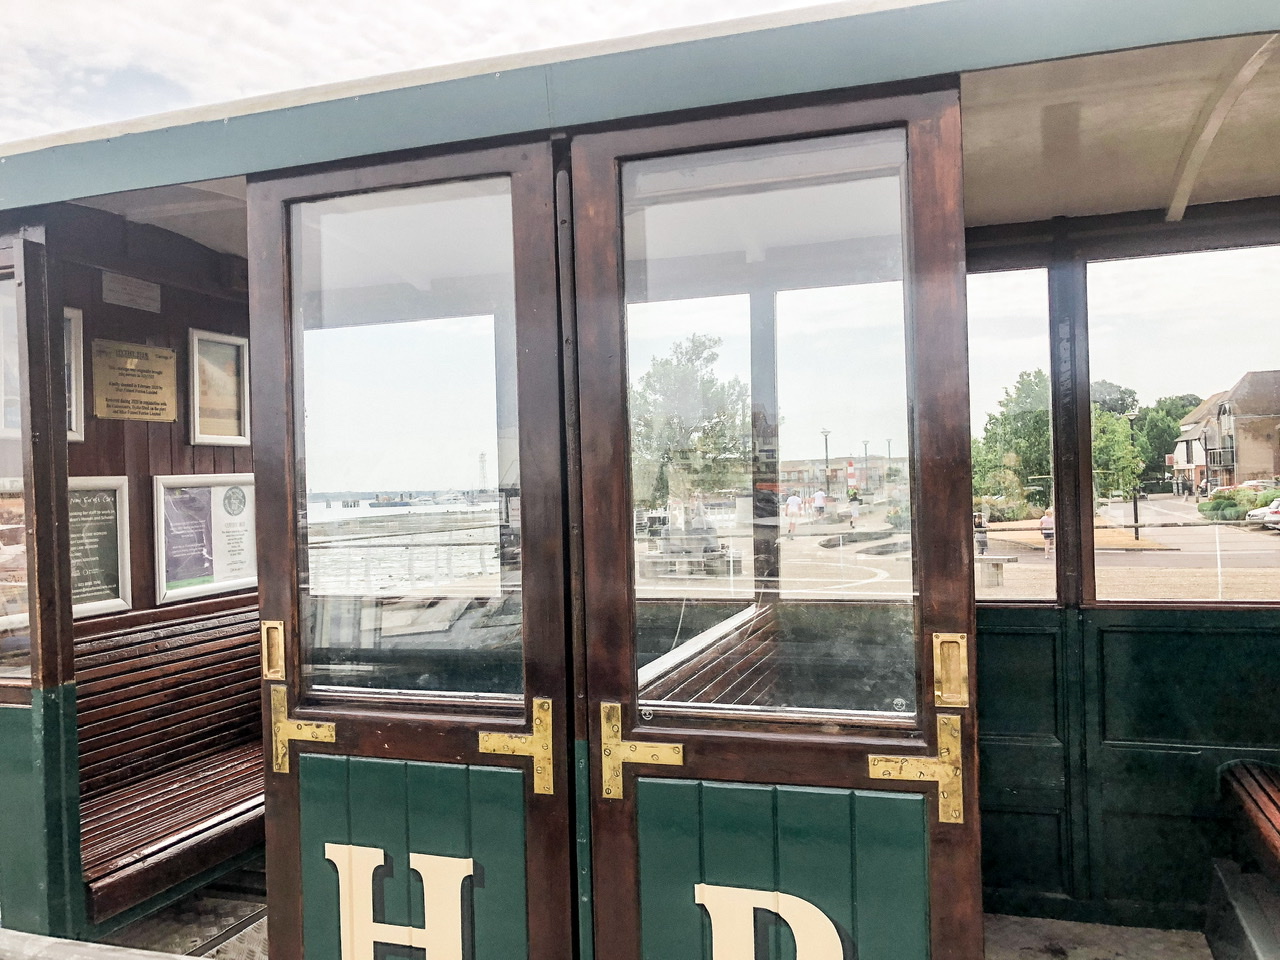 Looking into wooden Heritage train with green detailing and wooden bench seats, town of Hythe visible outside far window